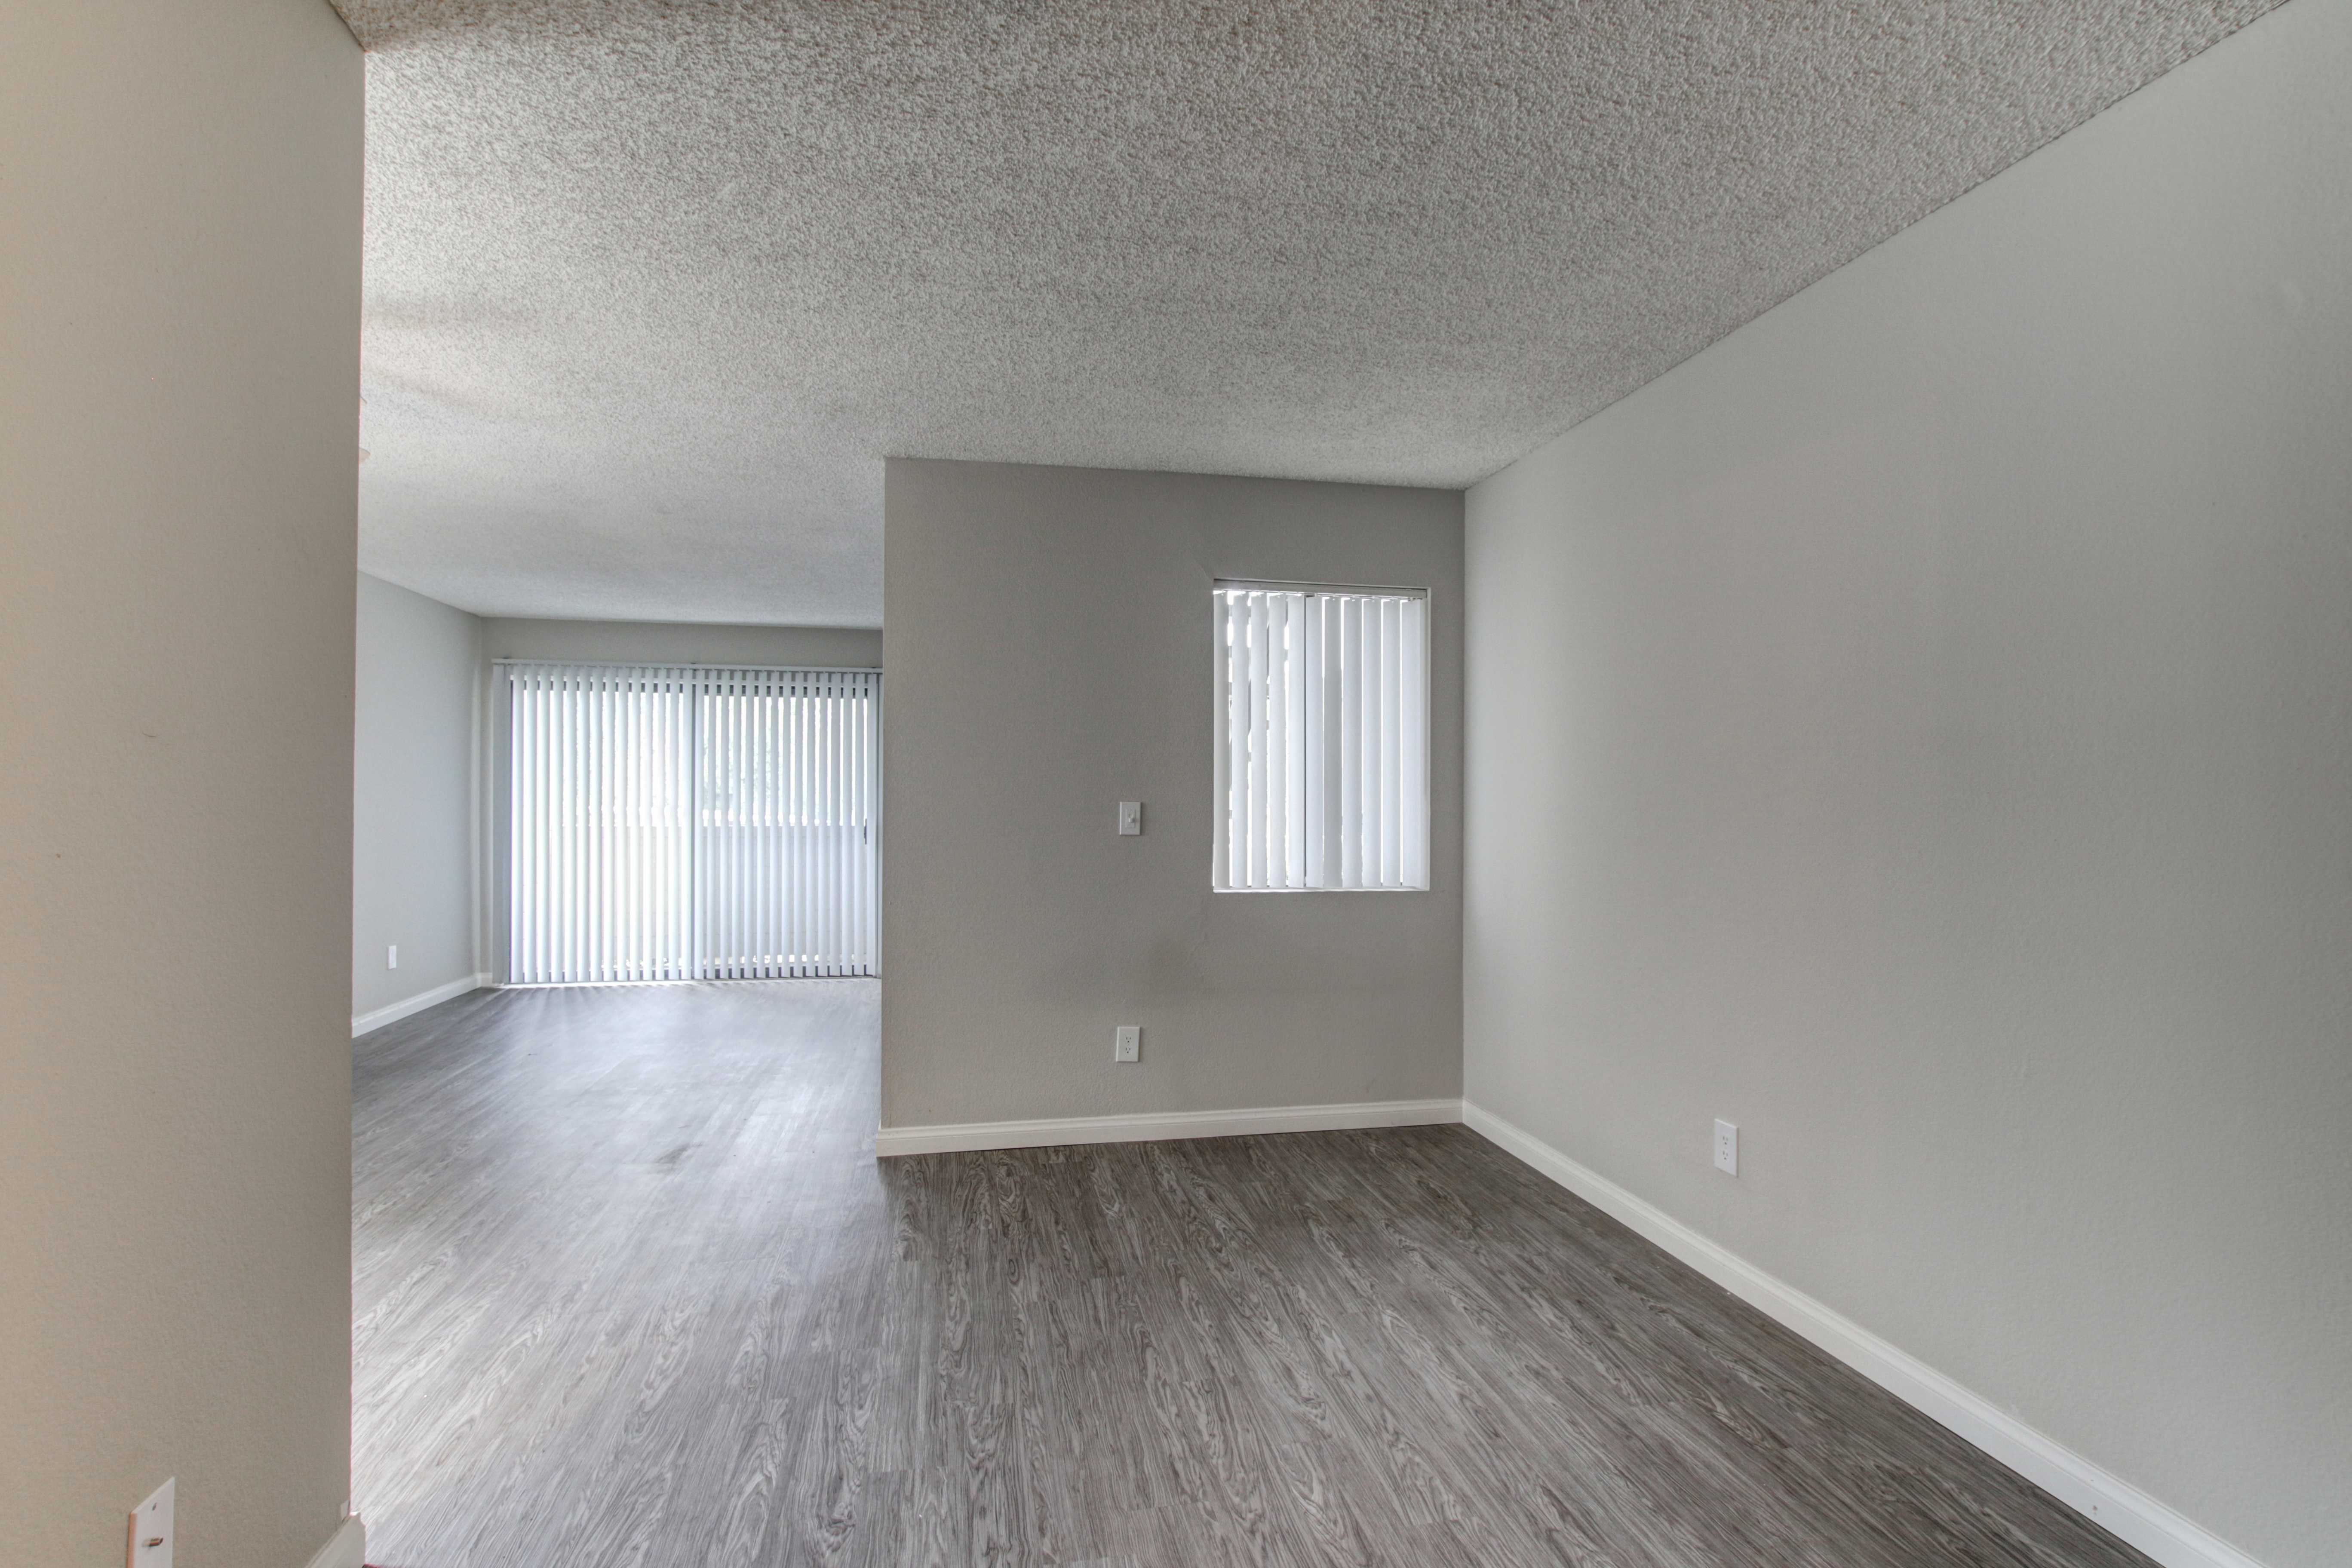 Different angle of unit. This view is from the hallway and adjacent is the living room area. There are two windows, one large and one small, with vertical blinds. There is wooden flooring.